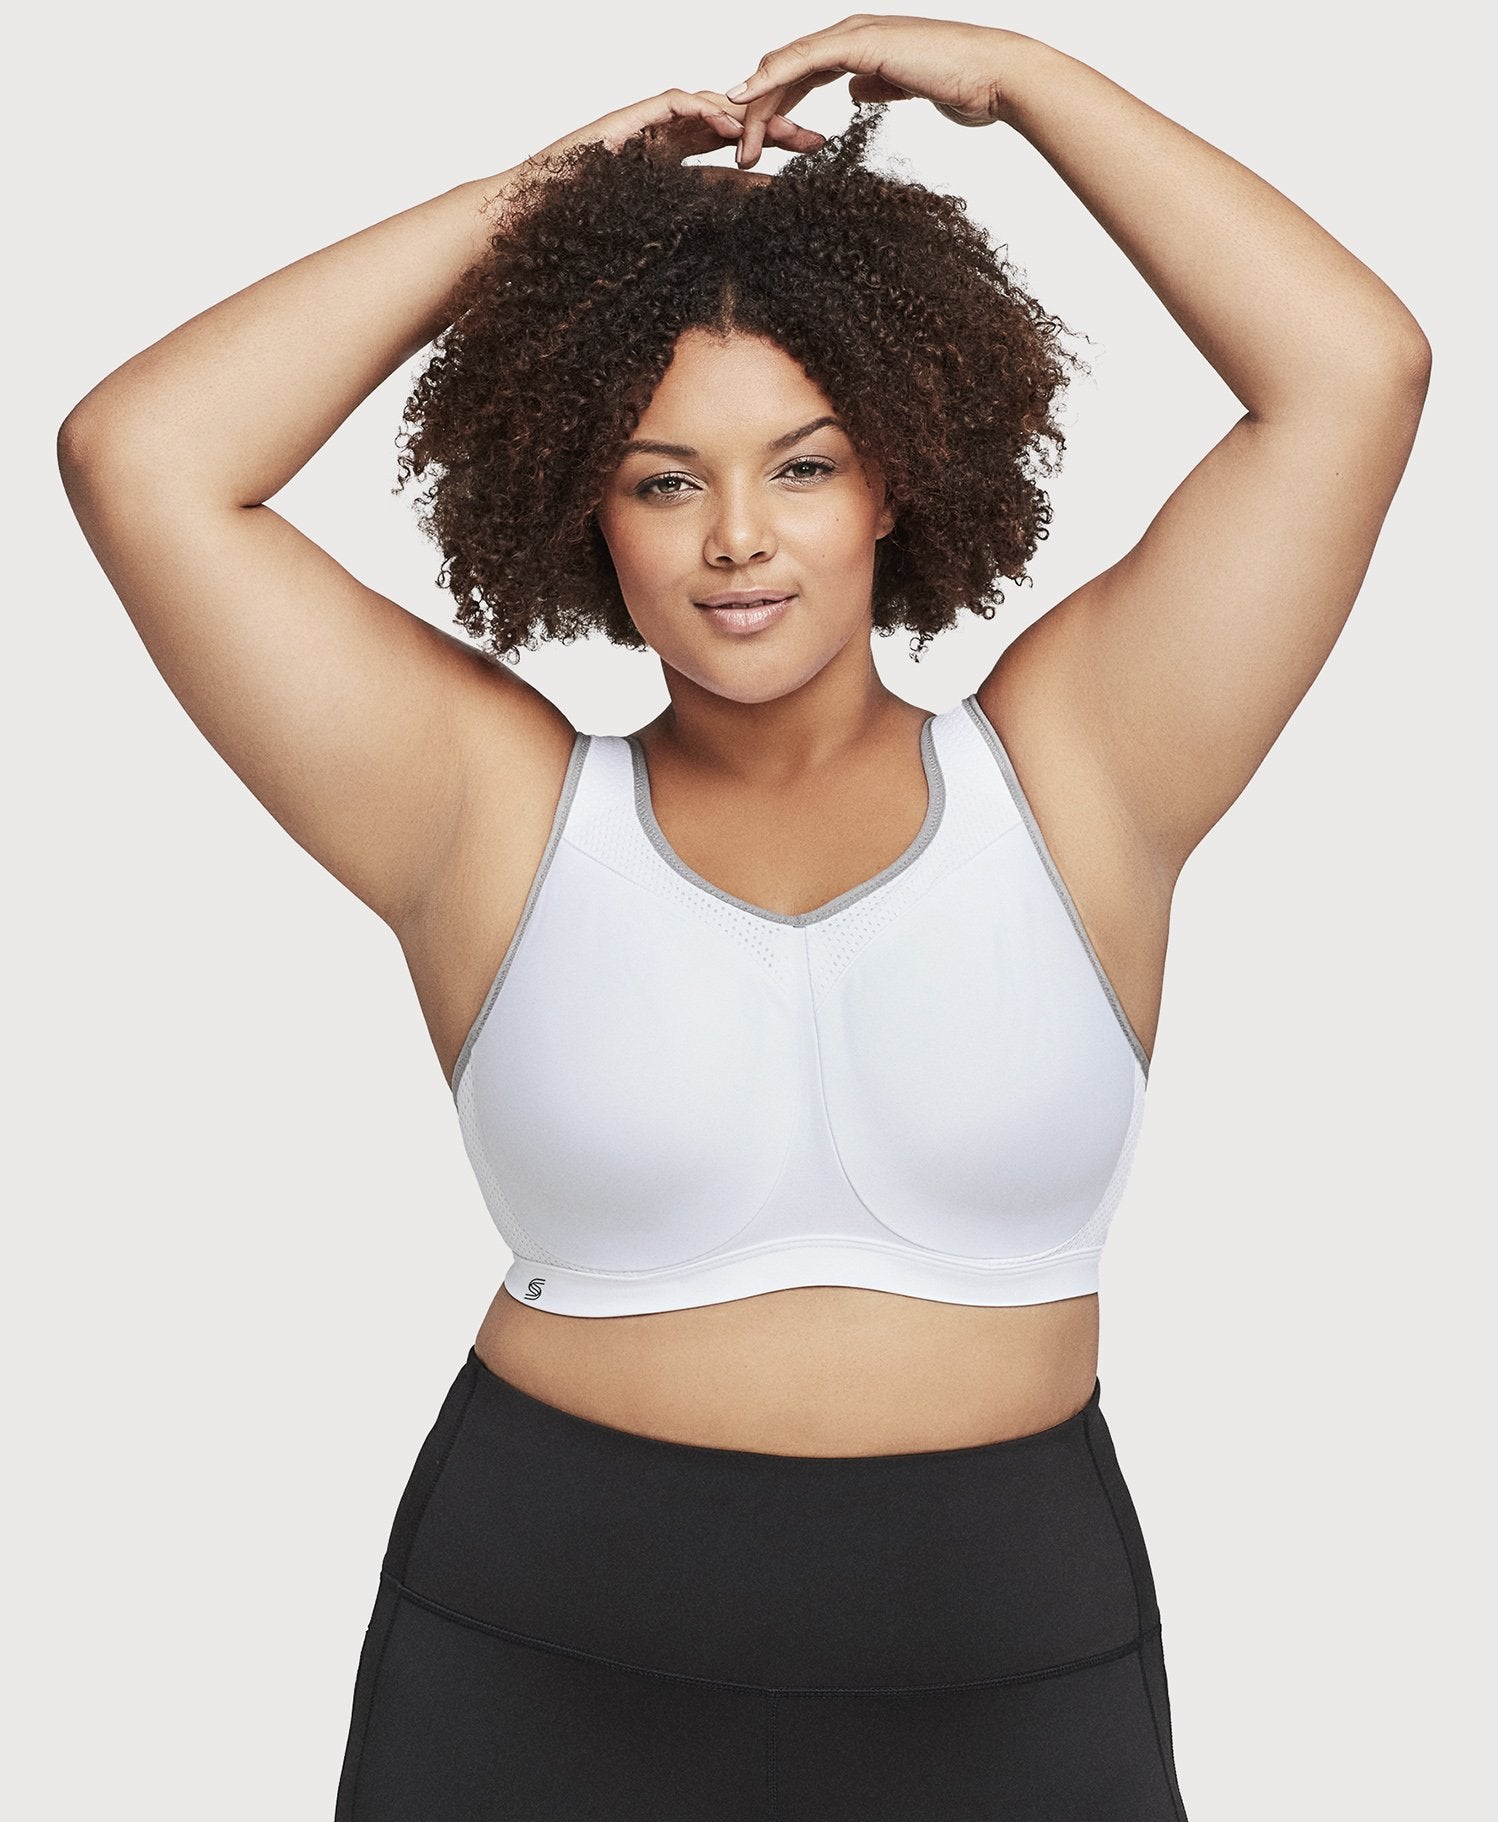 15 Best Sports Bras For Large Breasts To Get Maximum, 48% OFF